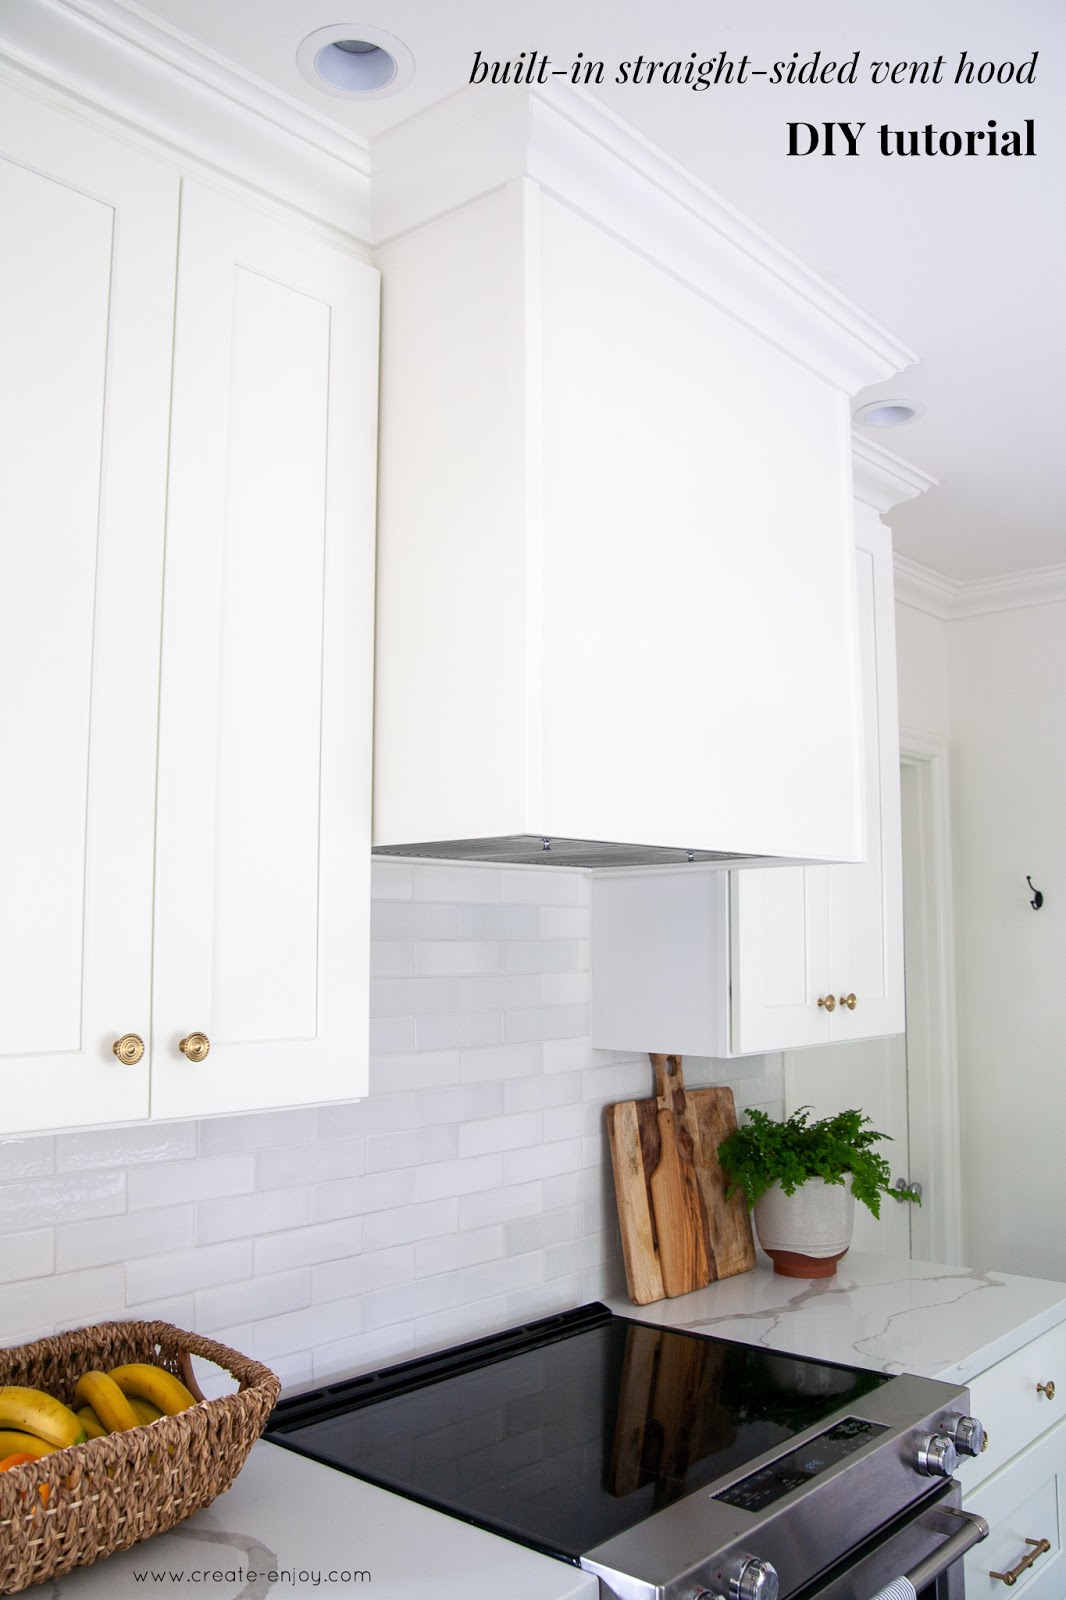 What To Do If You Don't Have a Range Hood or Vent